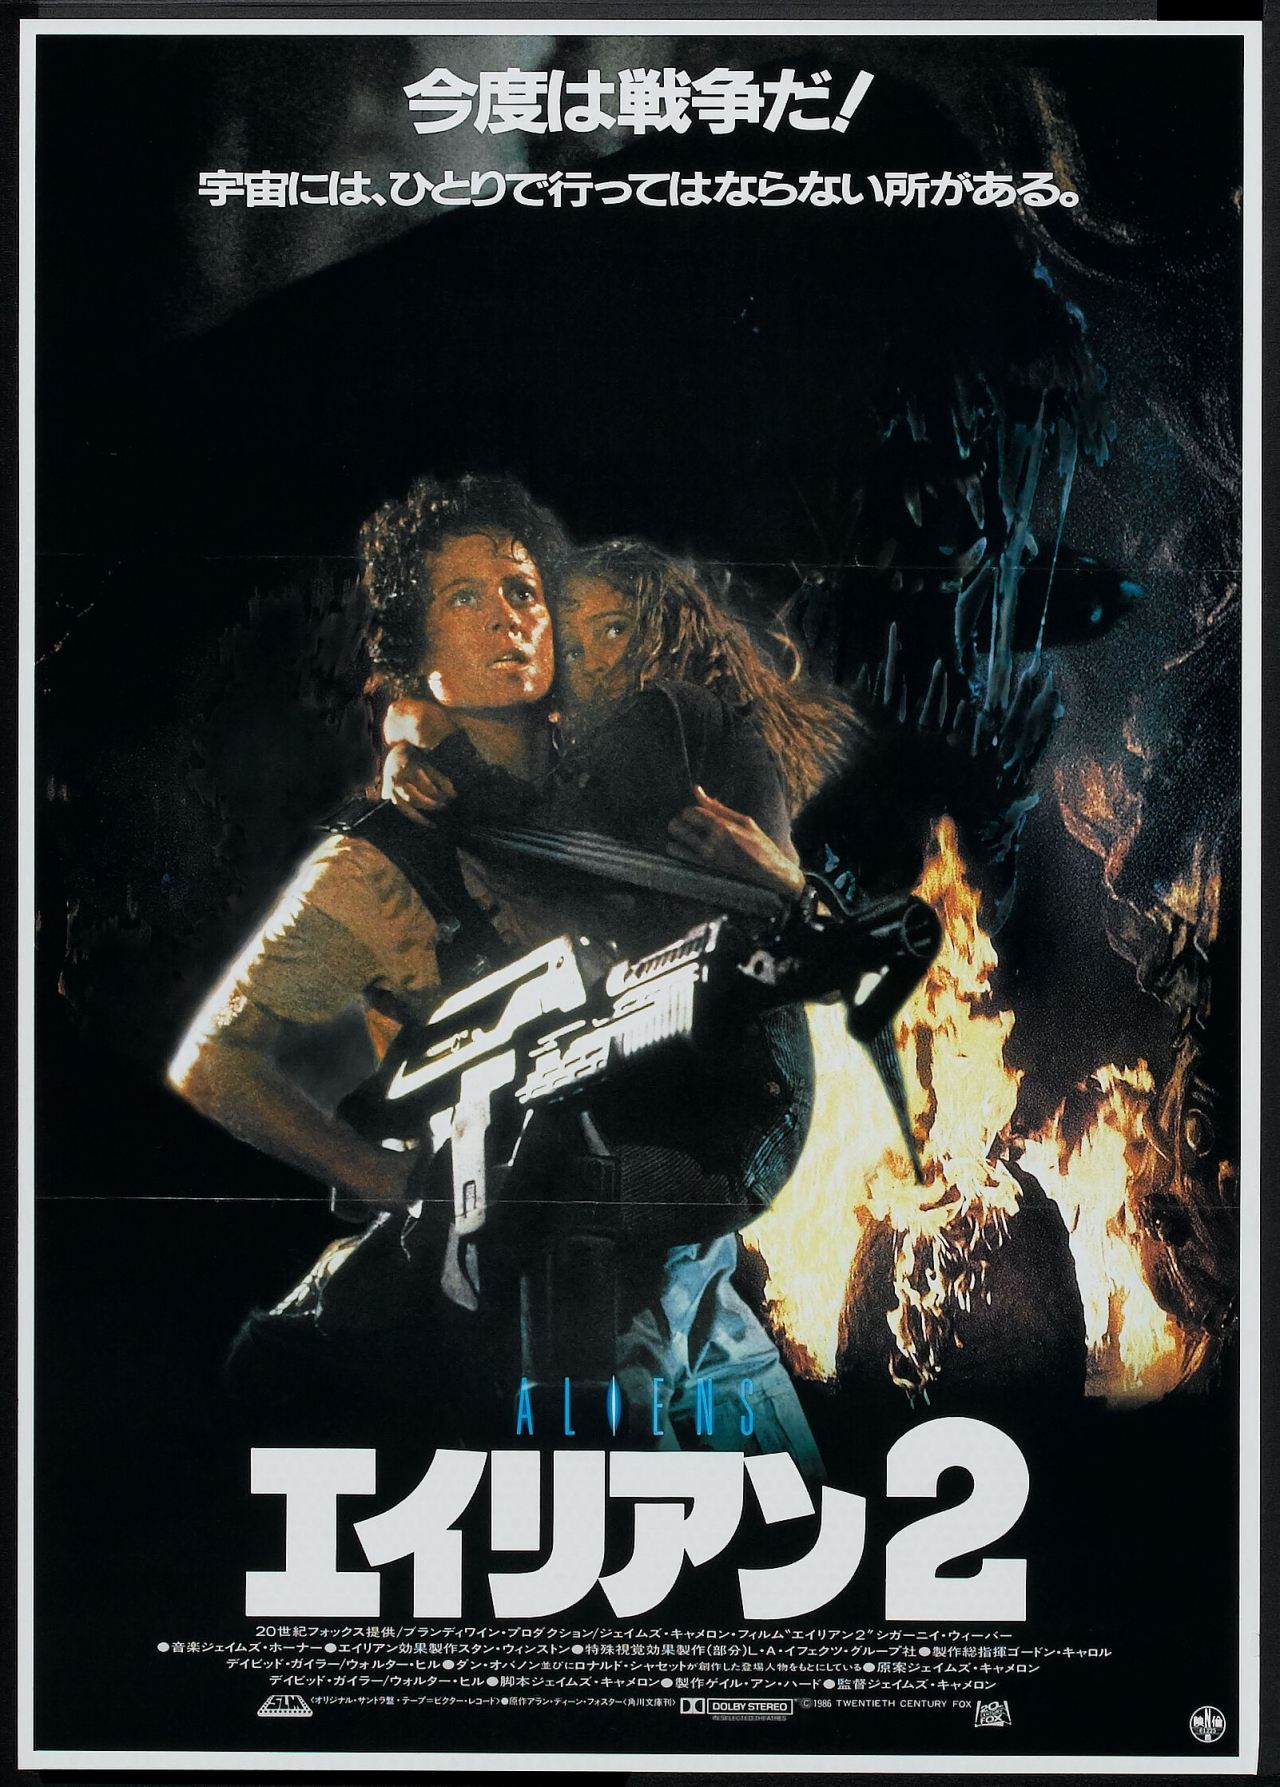 foreignmovieposters:
“Aliens (1986). Japanese poster.
”